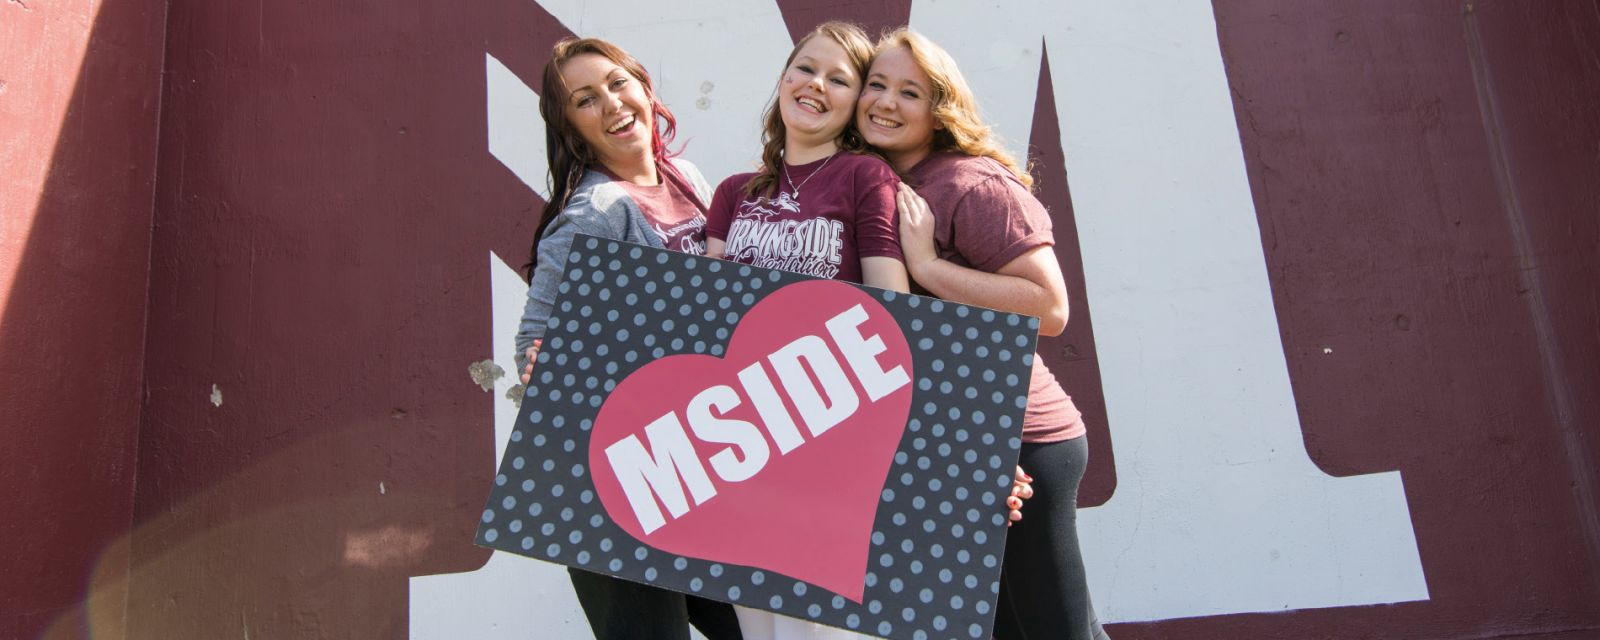 students with mside sign